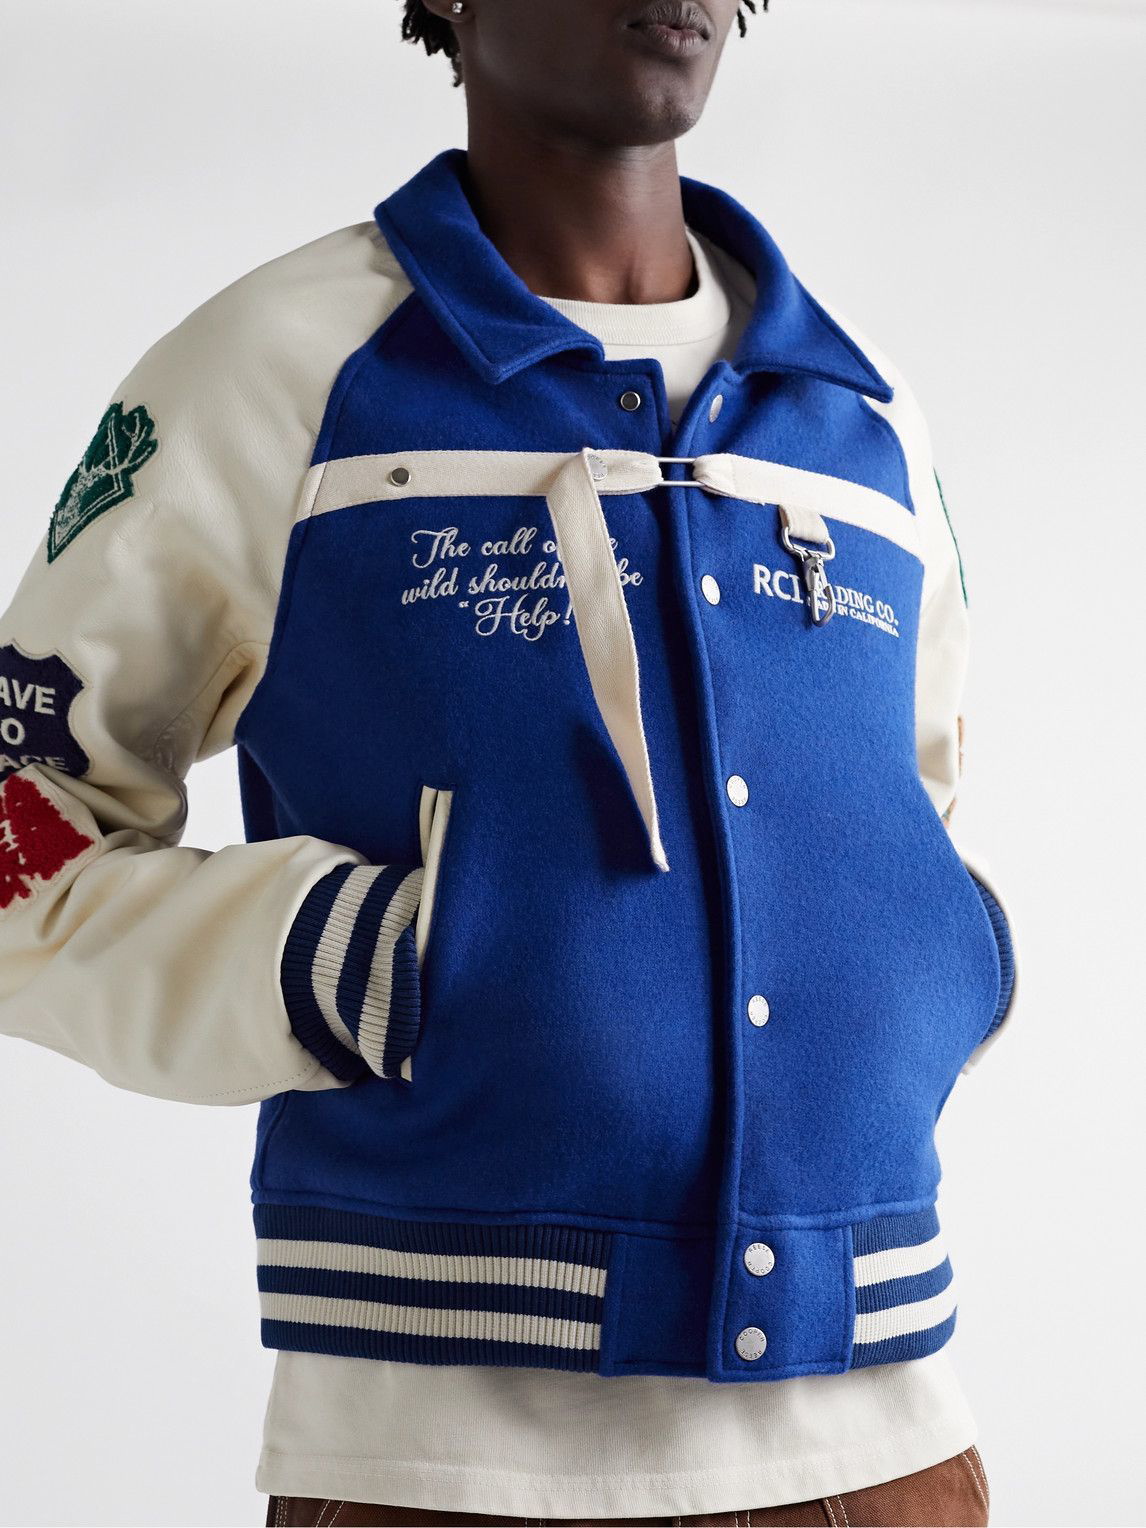 Reese Cooper Call Of The Wild Varsity Jacket - Royal Blue